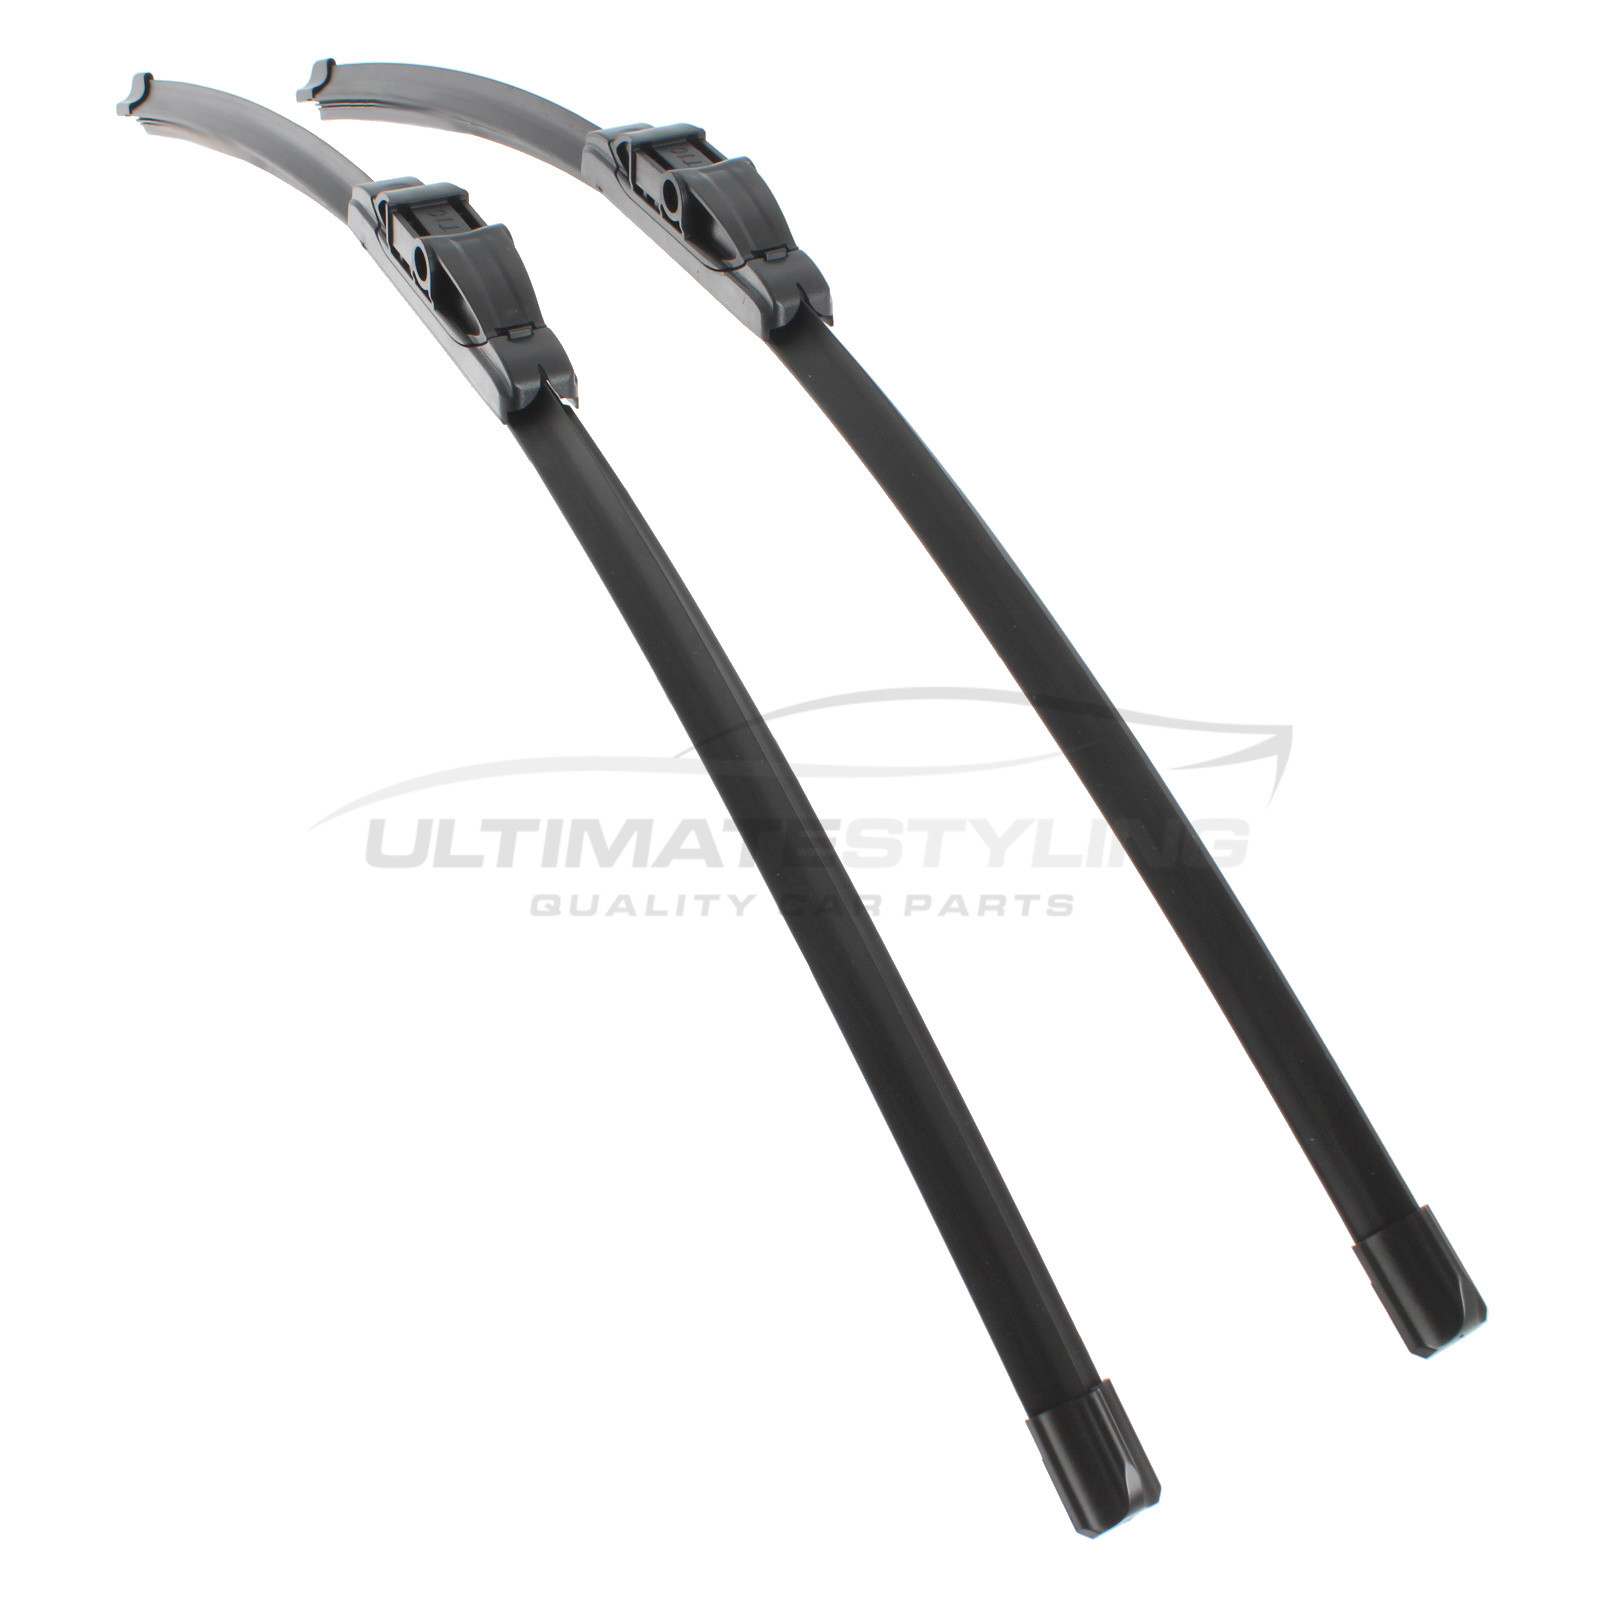 Drivers Side & Passenger Side (Front) Wiper Blades for Mercedes Benz E Class